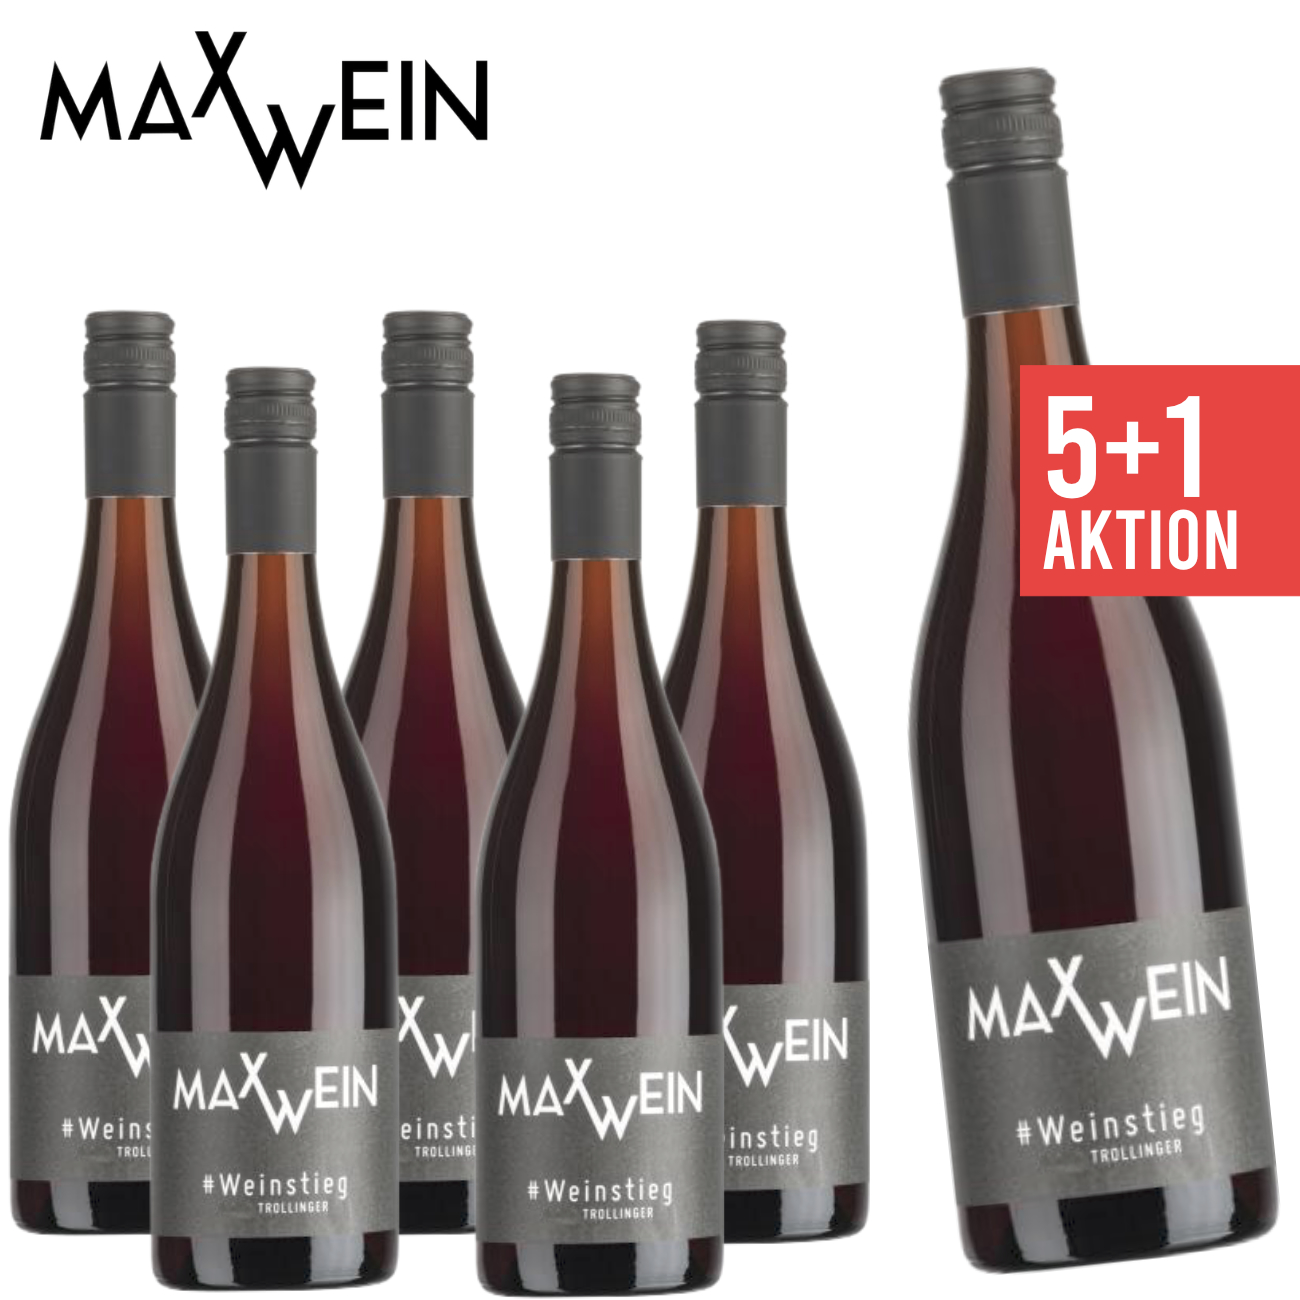 | wein.plus wines our wein.plus find+buy The find+buy: members of